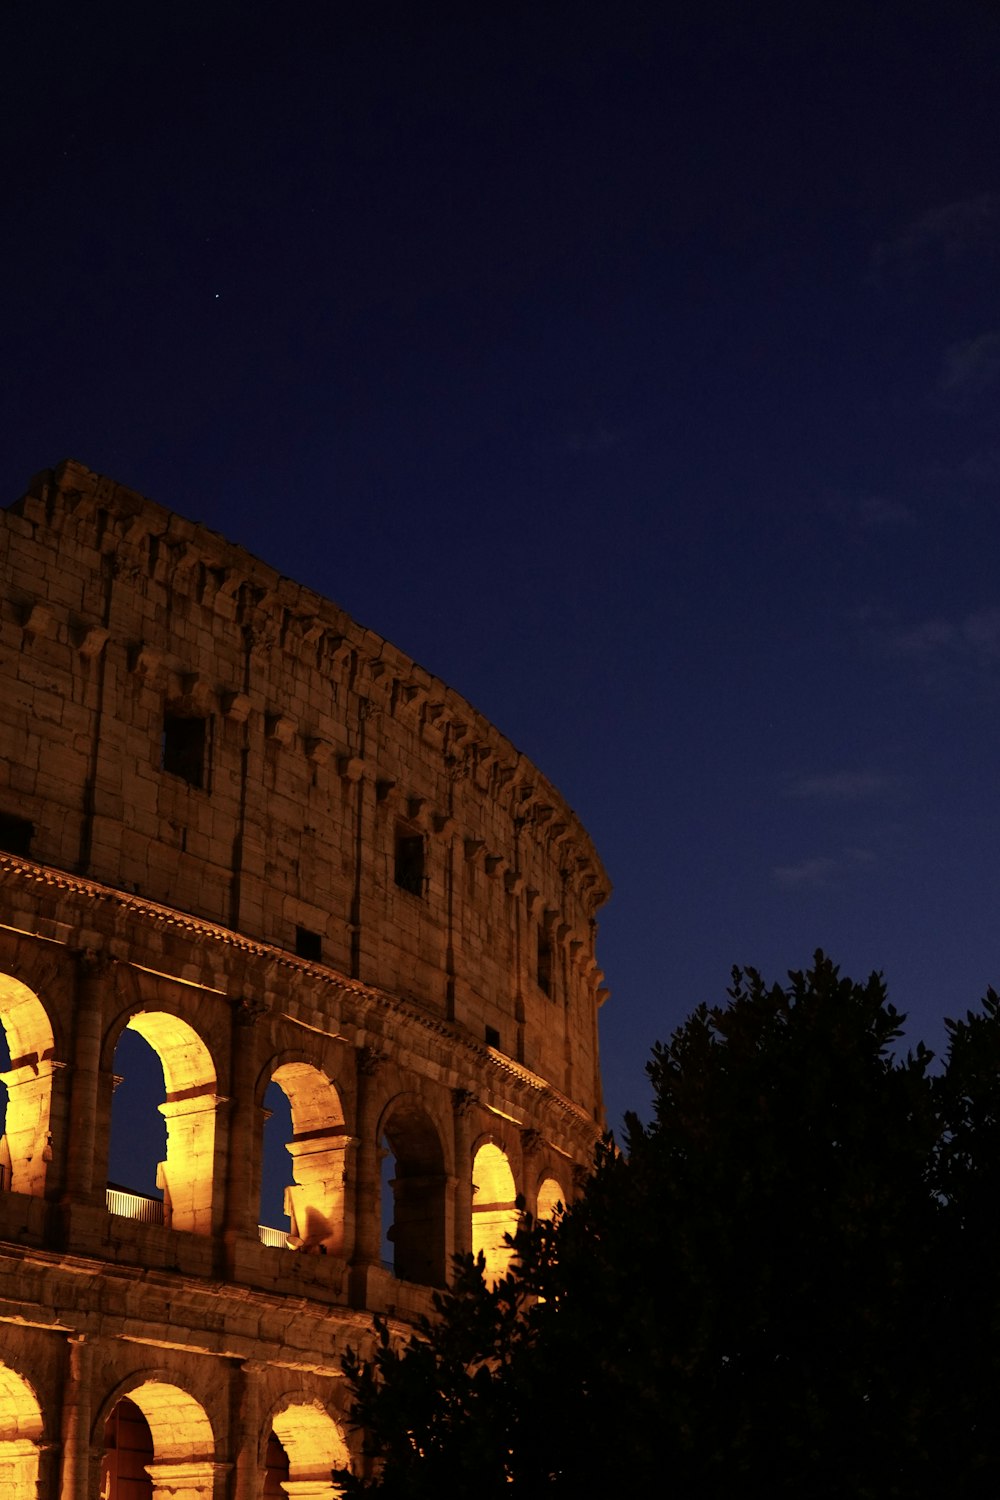 a night view of the colossion in rome